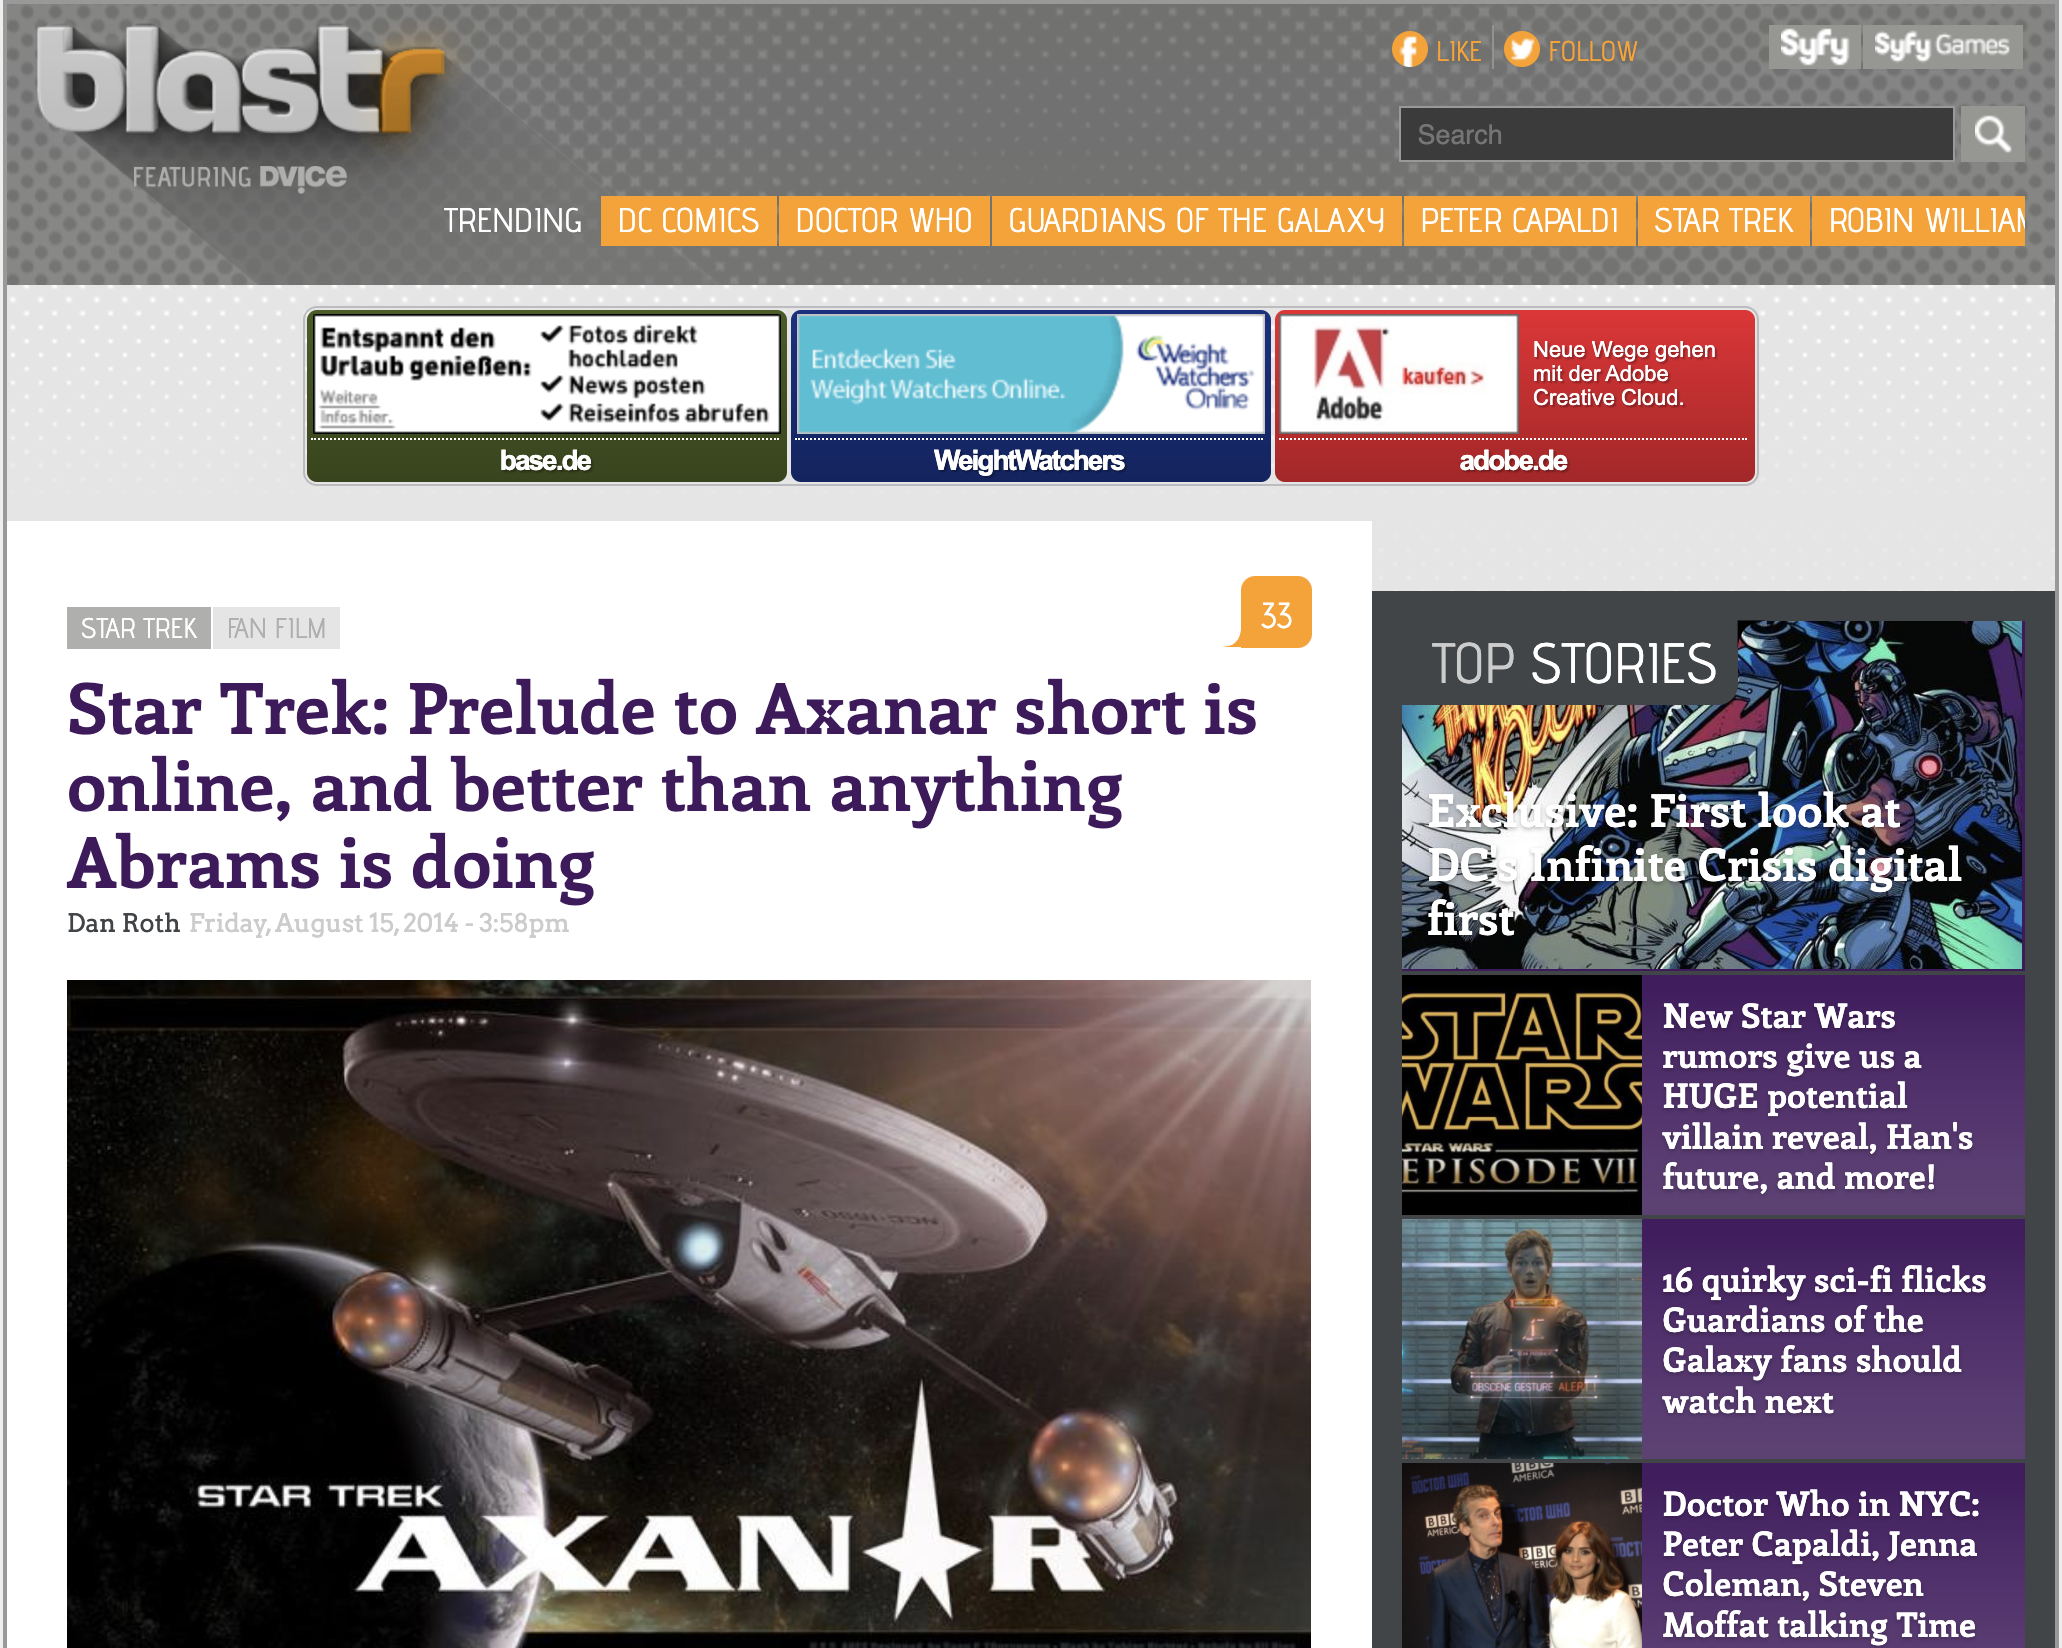 Star Trek: Prelude to Axanar short is online, and better than anything Abrams is doing